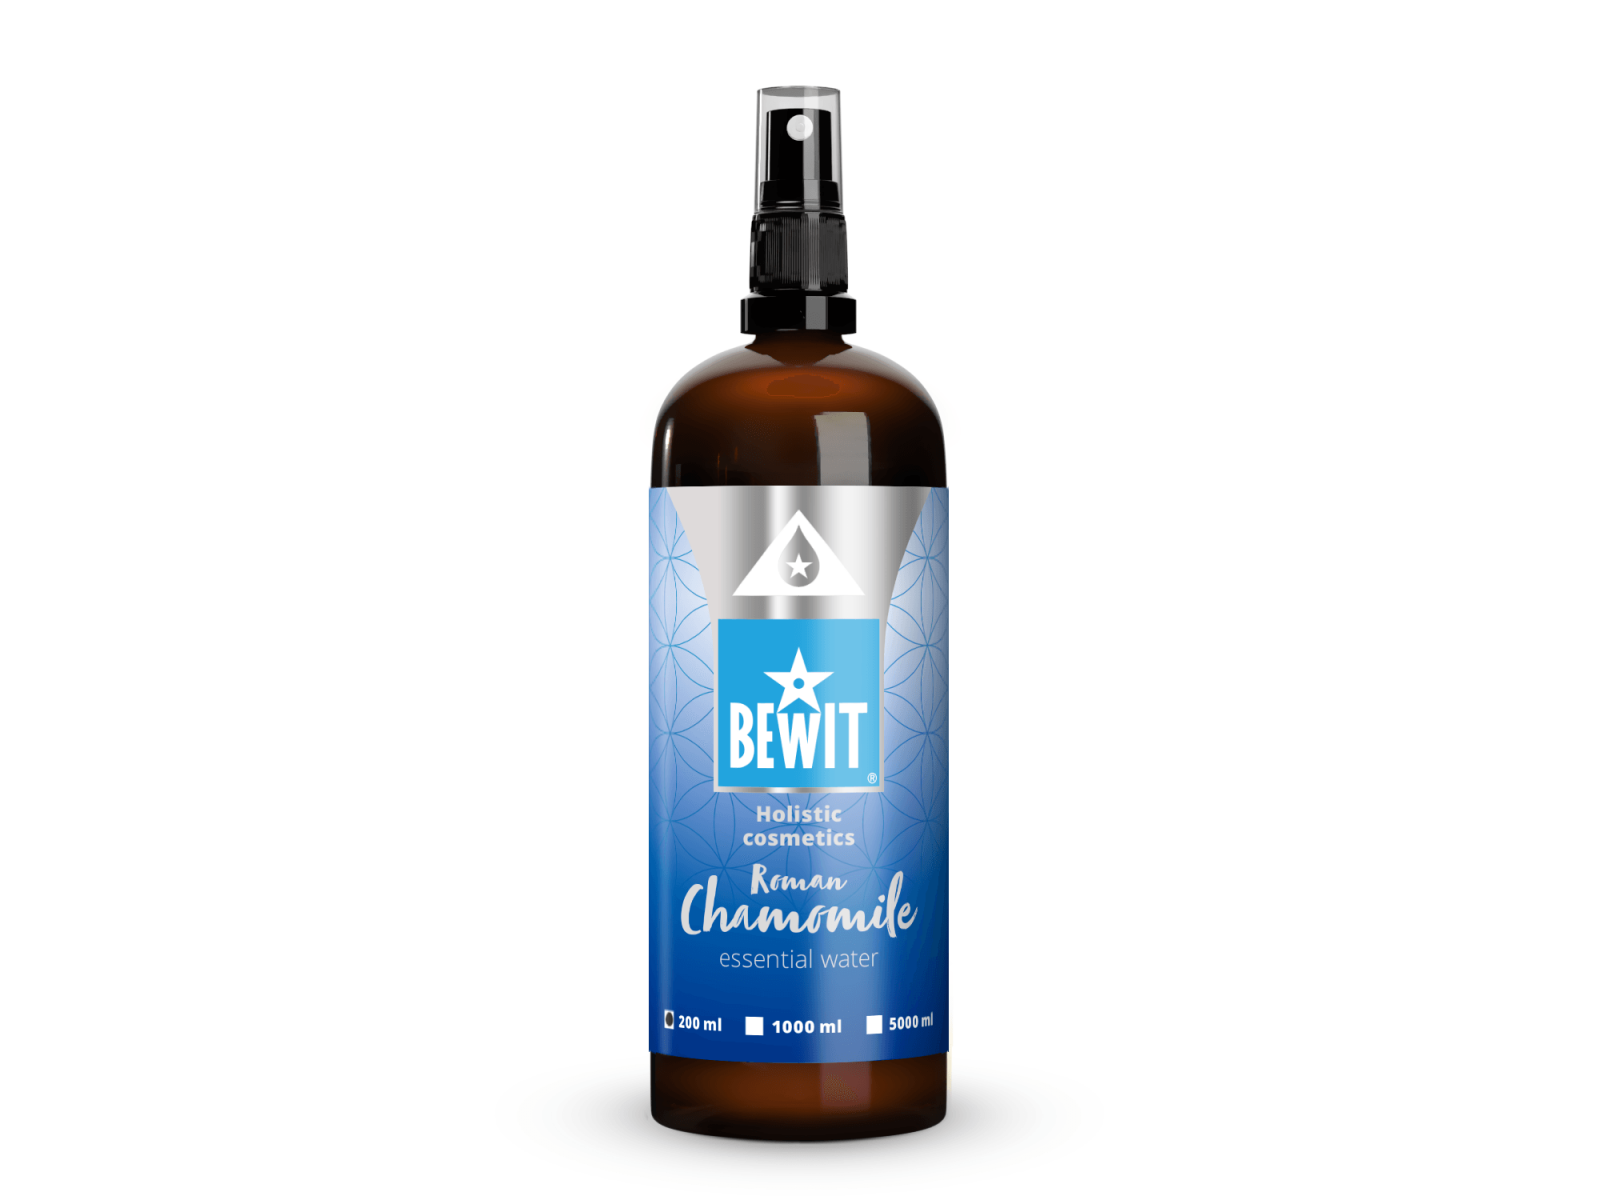 BEWIT Roman chamomile essential water - 100% NATURAL HYDROLYTE - 2